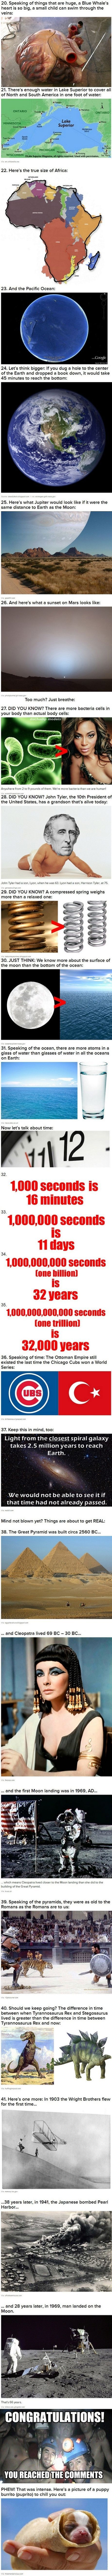 Mindblowing facts